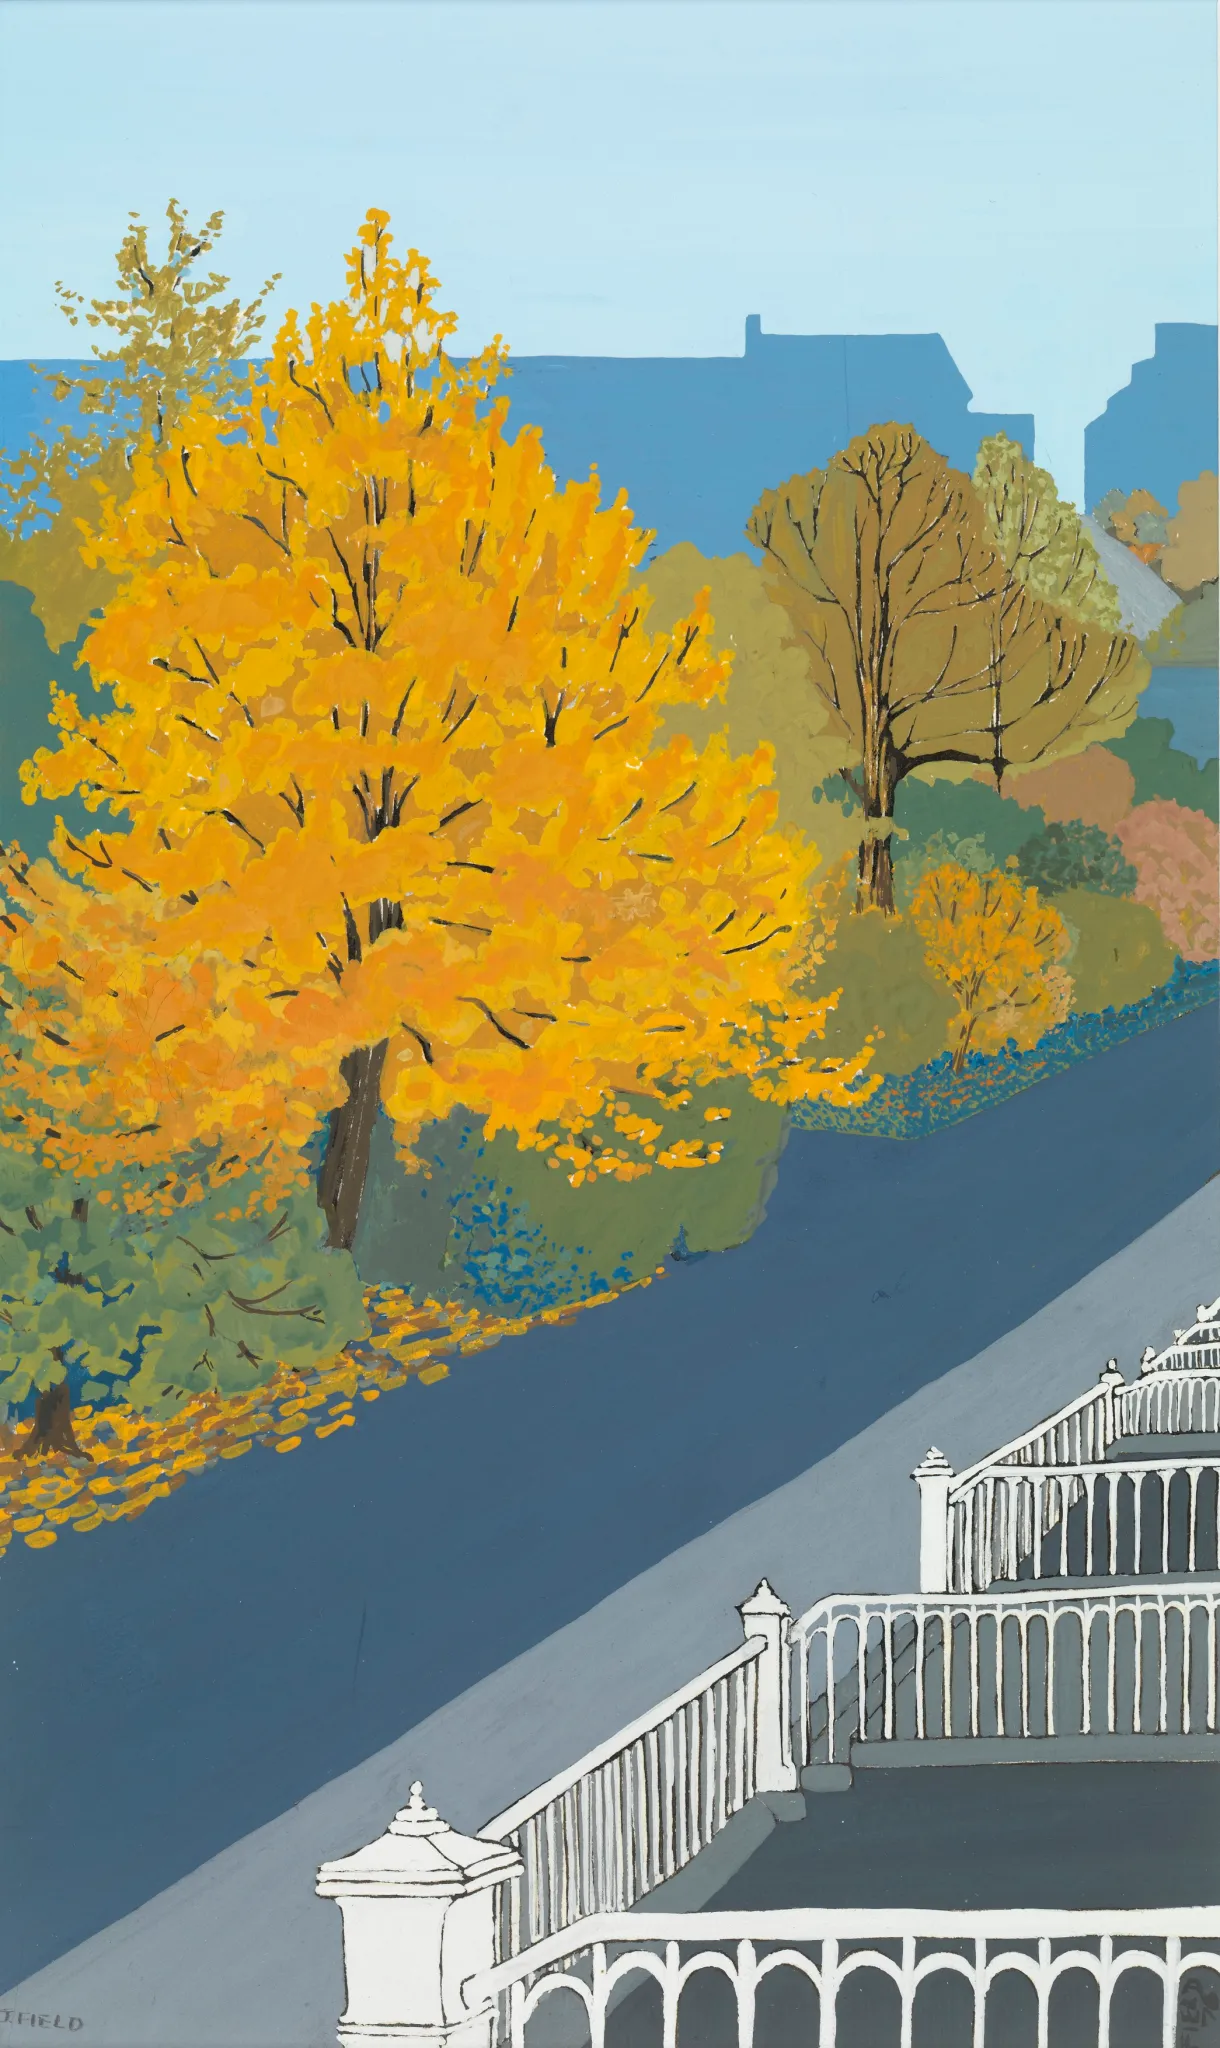 a cutout style print image of an autumn Glasgow street scene with a golden tree and a blue street.